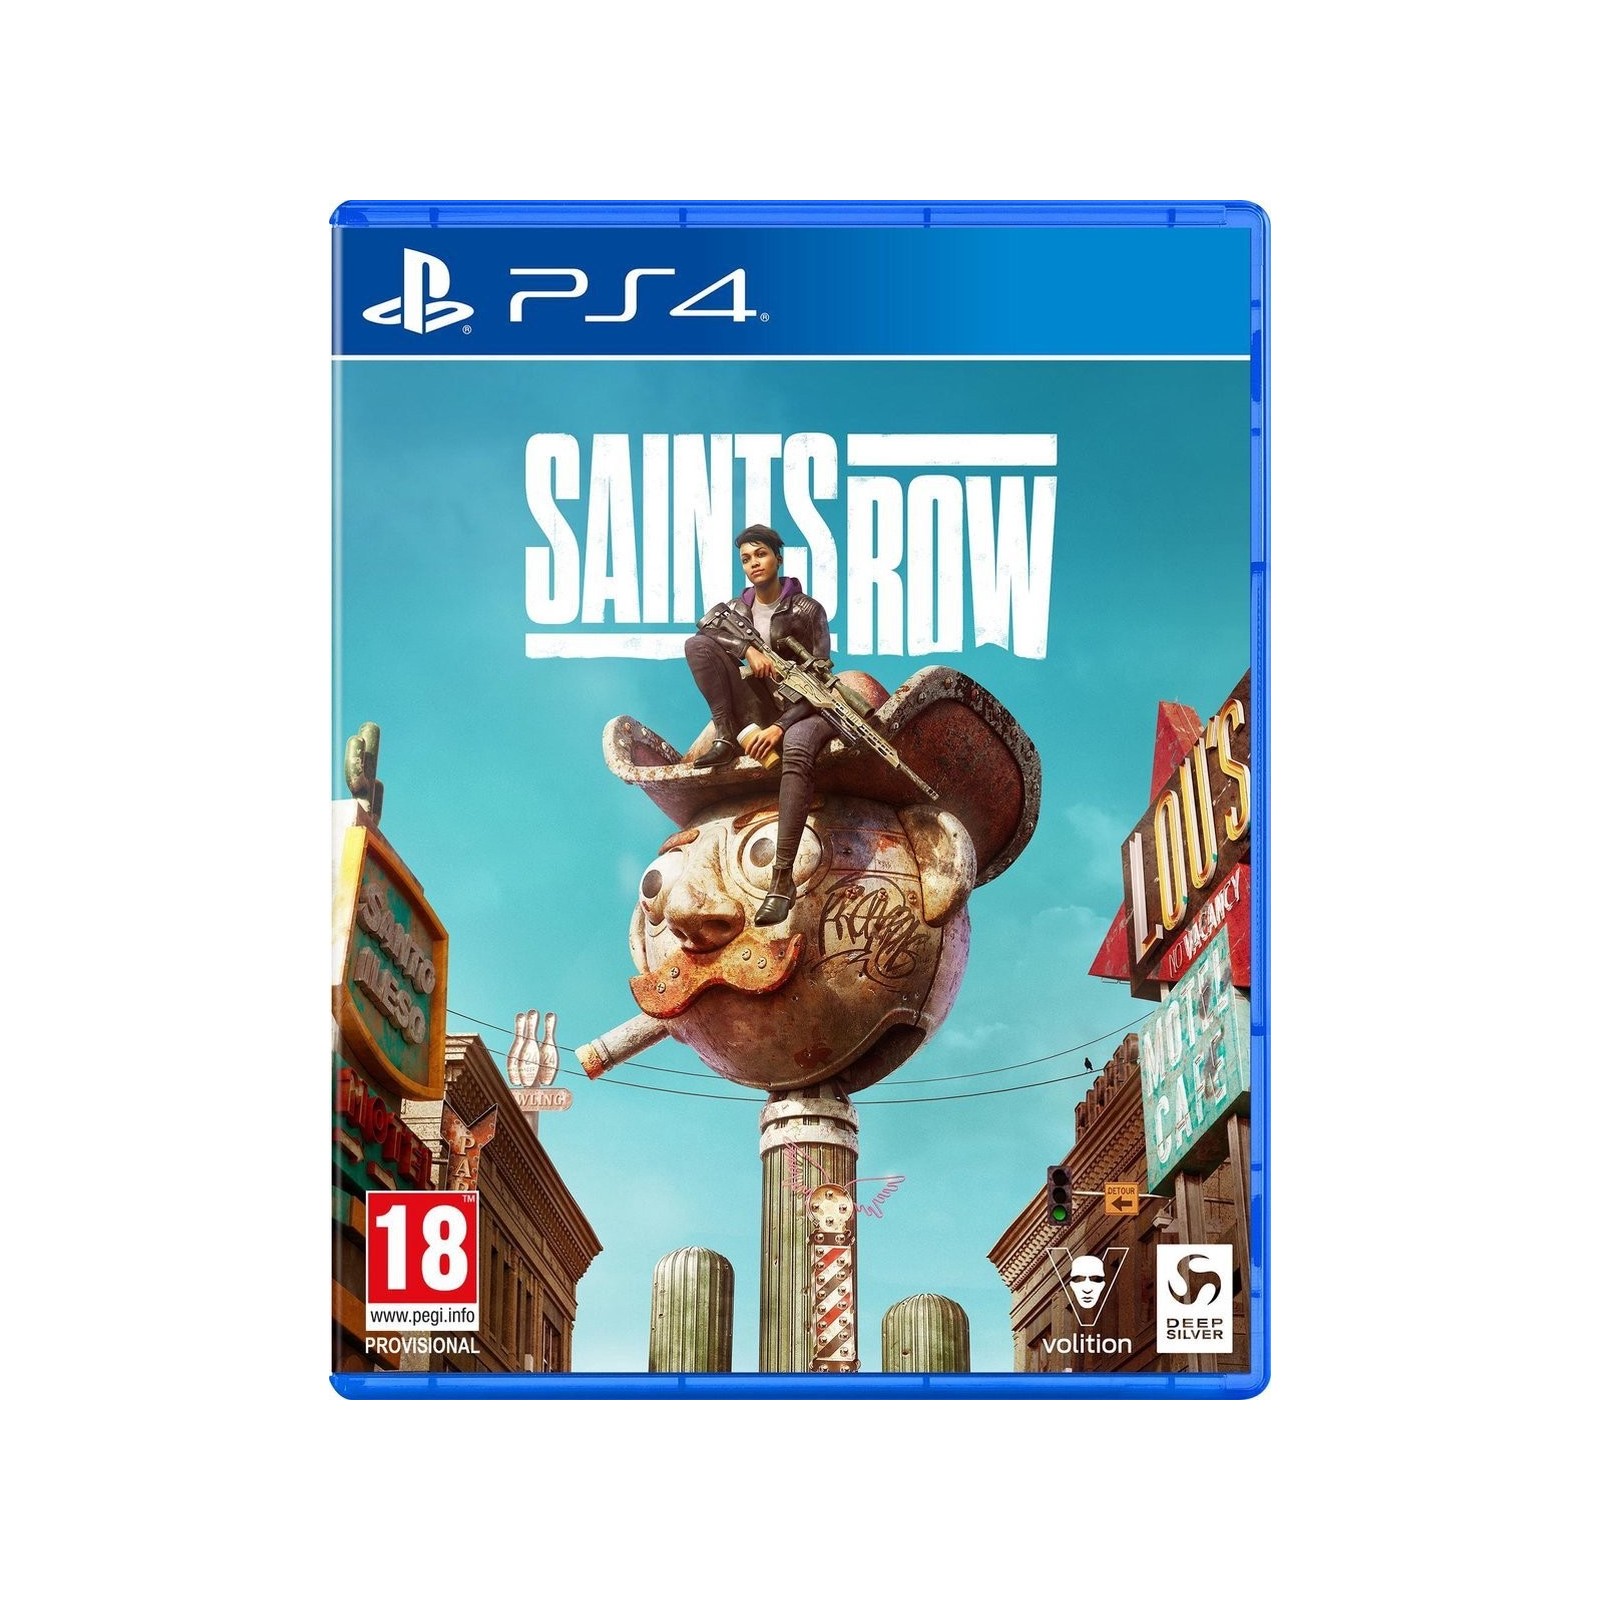 Saints Row (NEW) -  (NL/FR/Multi in Game)